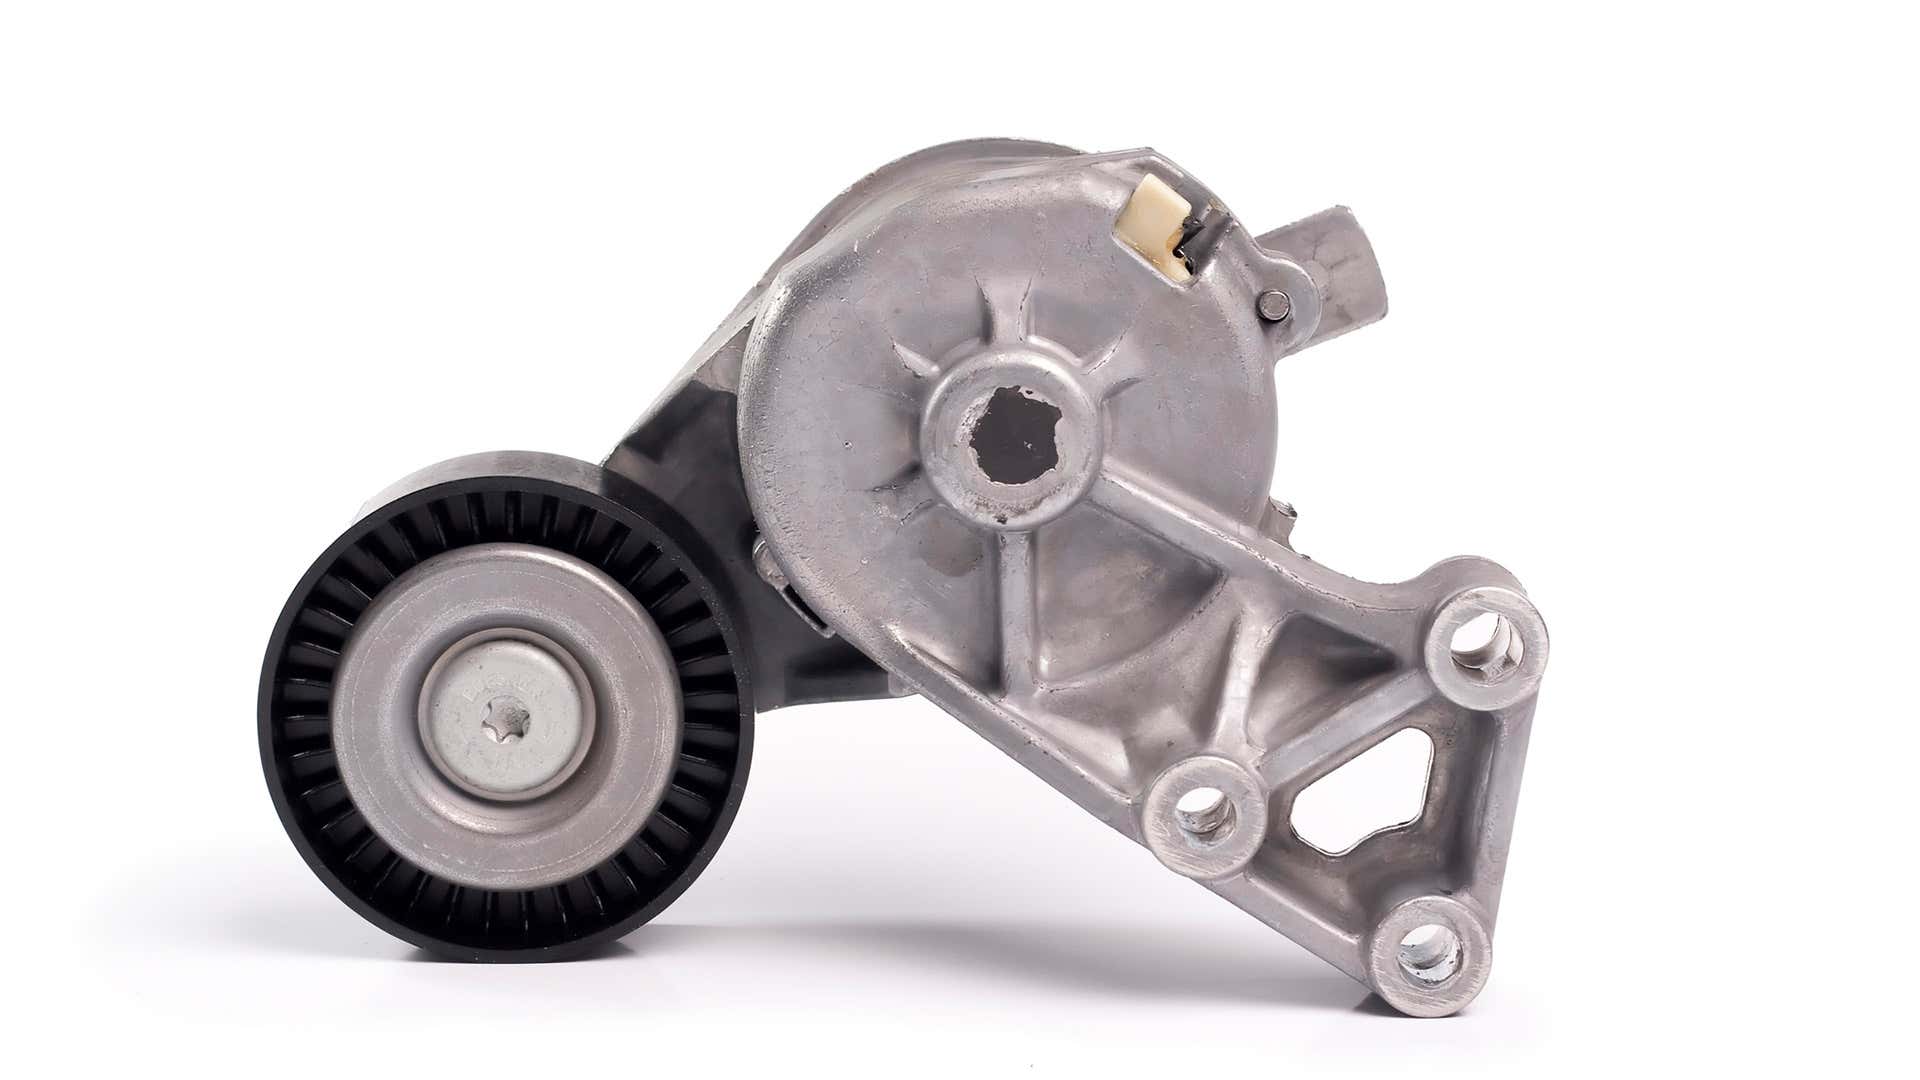 A belt tensioner off the engine on a white background.